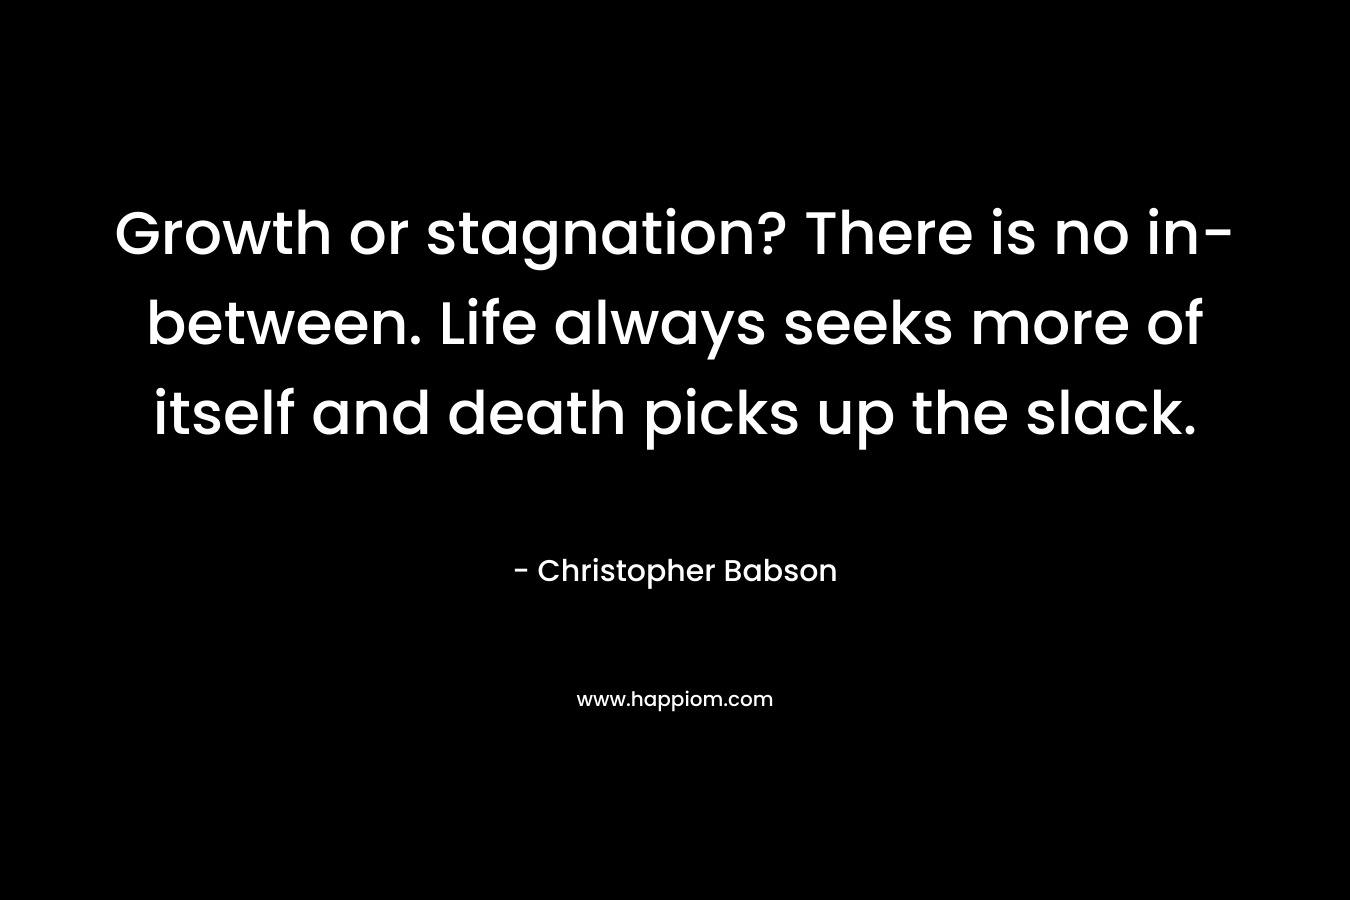 Growth or stagnation? There is no in-between. Life always seeks more of itself and death picks up the slack. – Christopher Babson